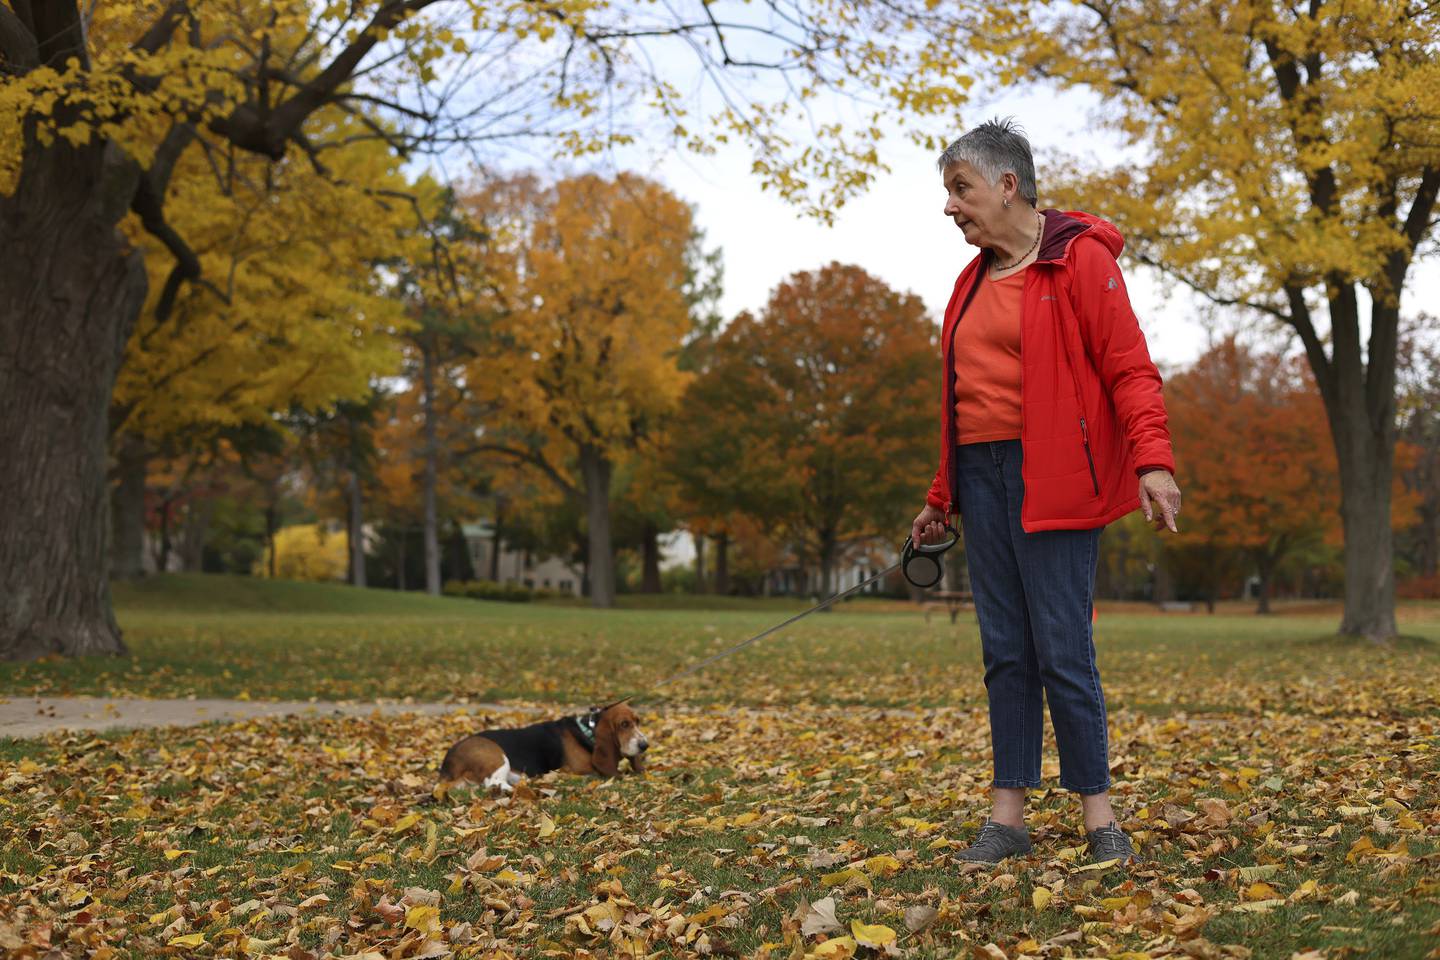 Colleen Root walks her dog Penny in Centennial Park on Oct. 24, 2022, in Winnetka. She's a Winnetka Park District board member who criticizes the proposed land swap.